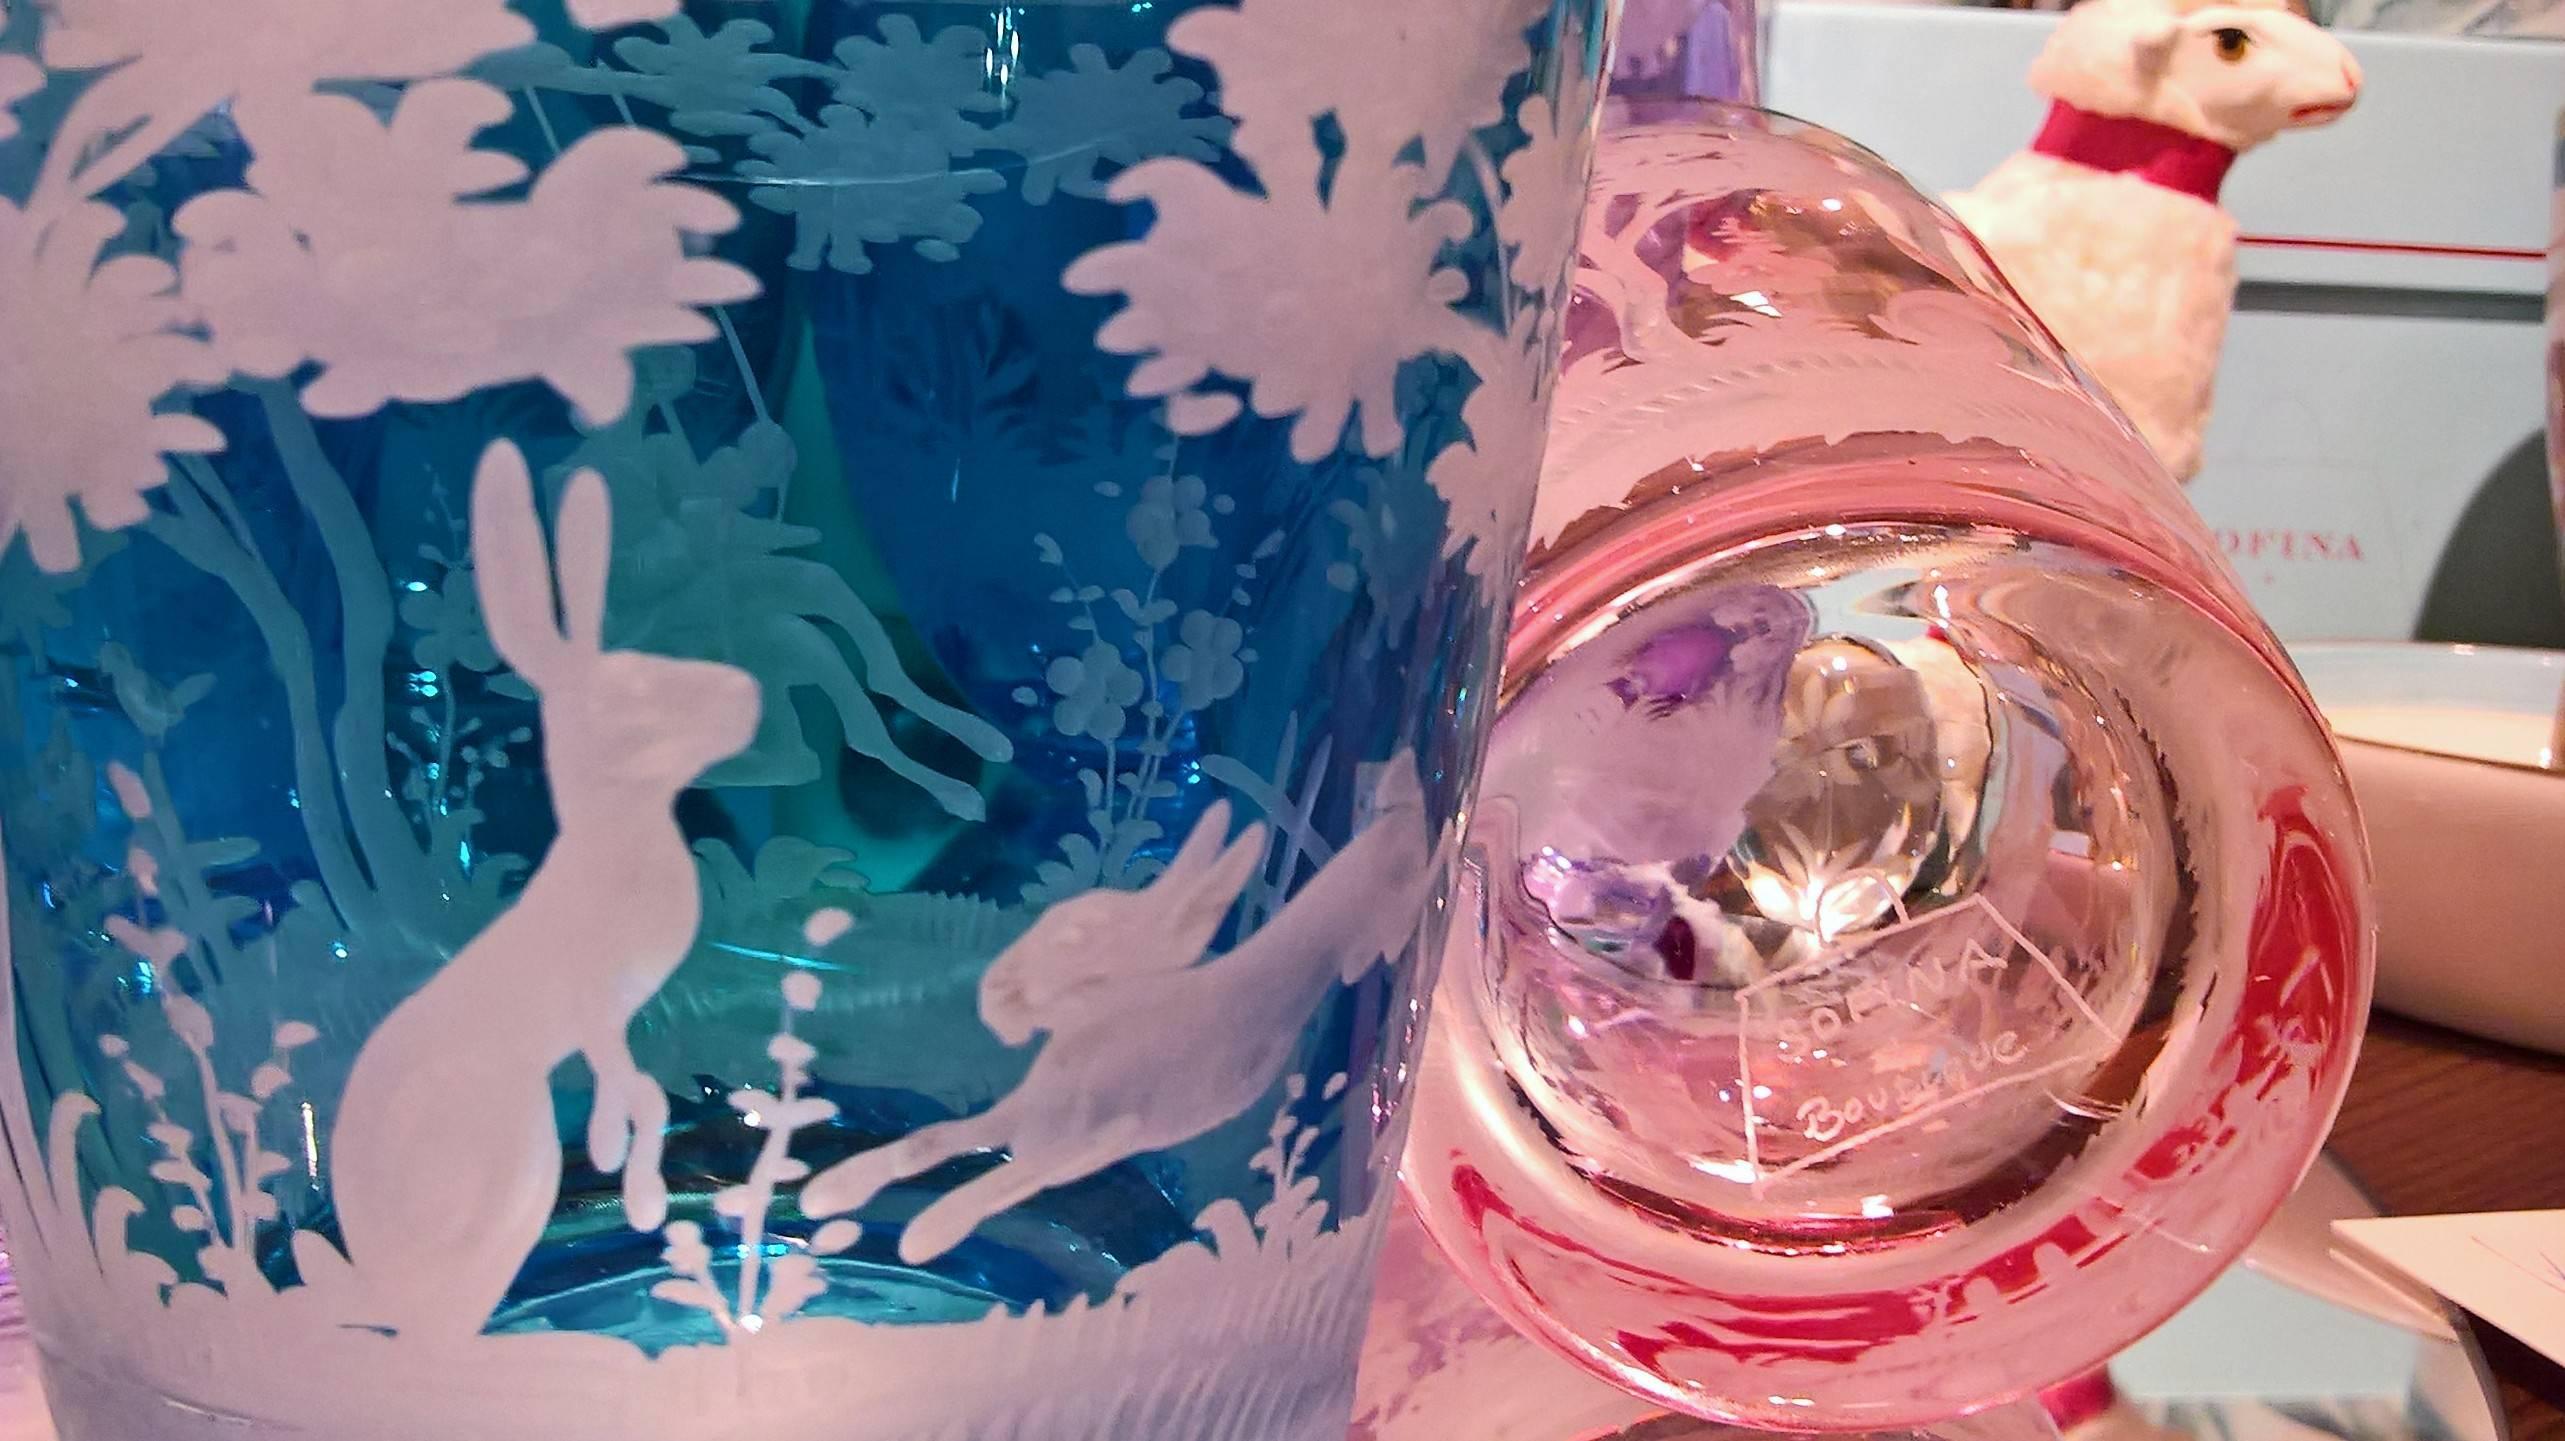 German Country Crystal Vase with Easter Rabbit Decor in Blue Sofina Boutique Kitzbuehel For Sale